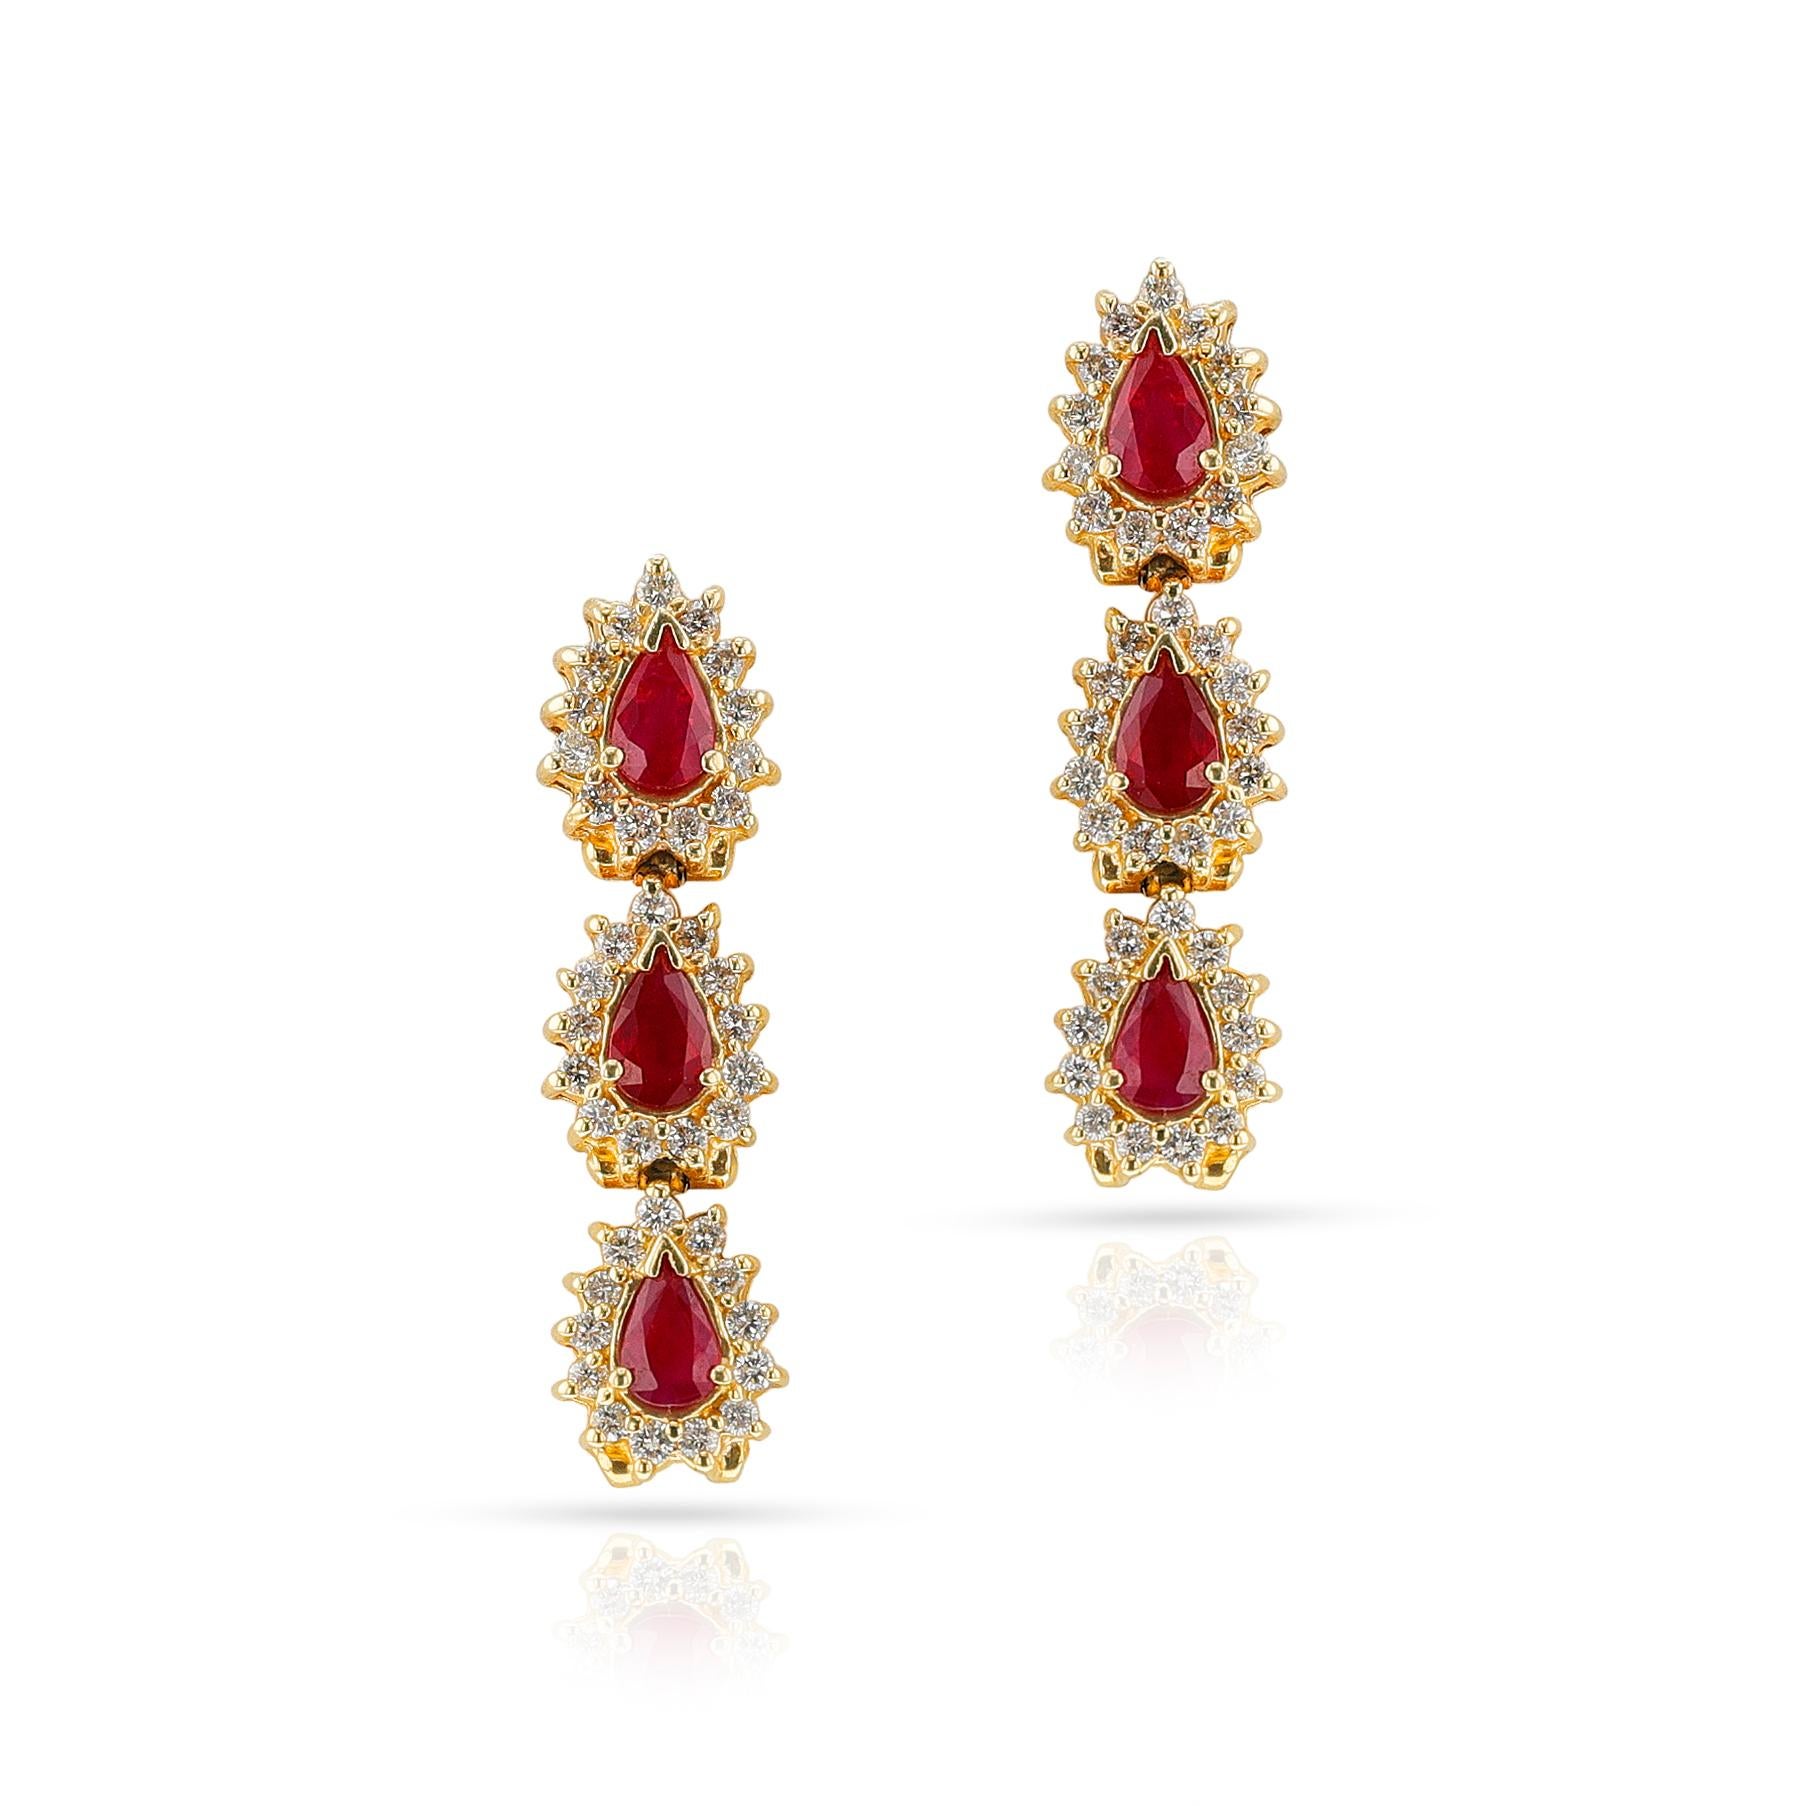 A pair of Three Pear Shape Rubies surrounded by diamonds in dangling earrings, made in 14k Yellow Gold. The total weight of the earring is 9.44 grams. The total weight of the rubies is 2,20 carats and the total weight of the diamonds is appx. 1.50